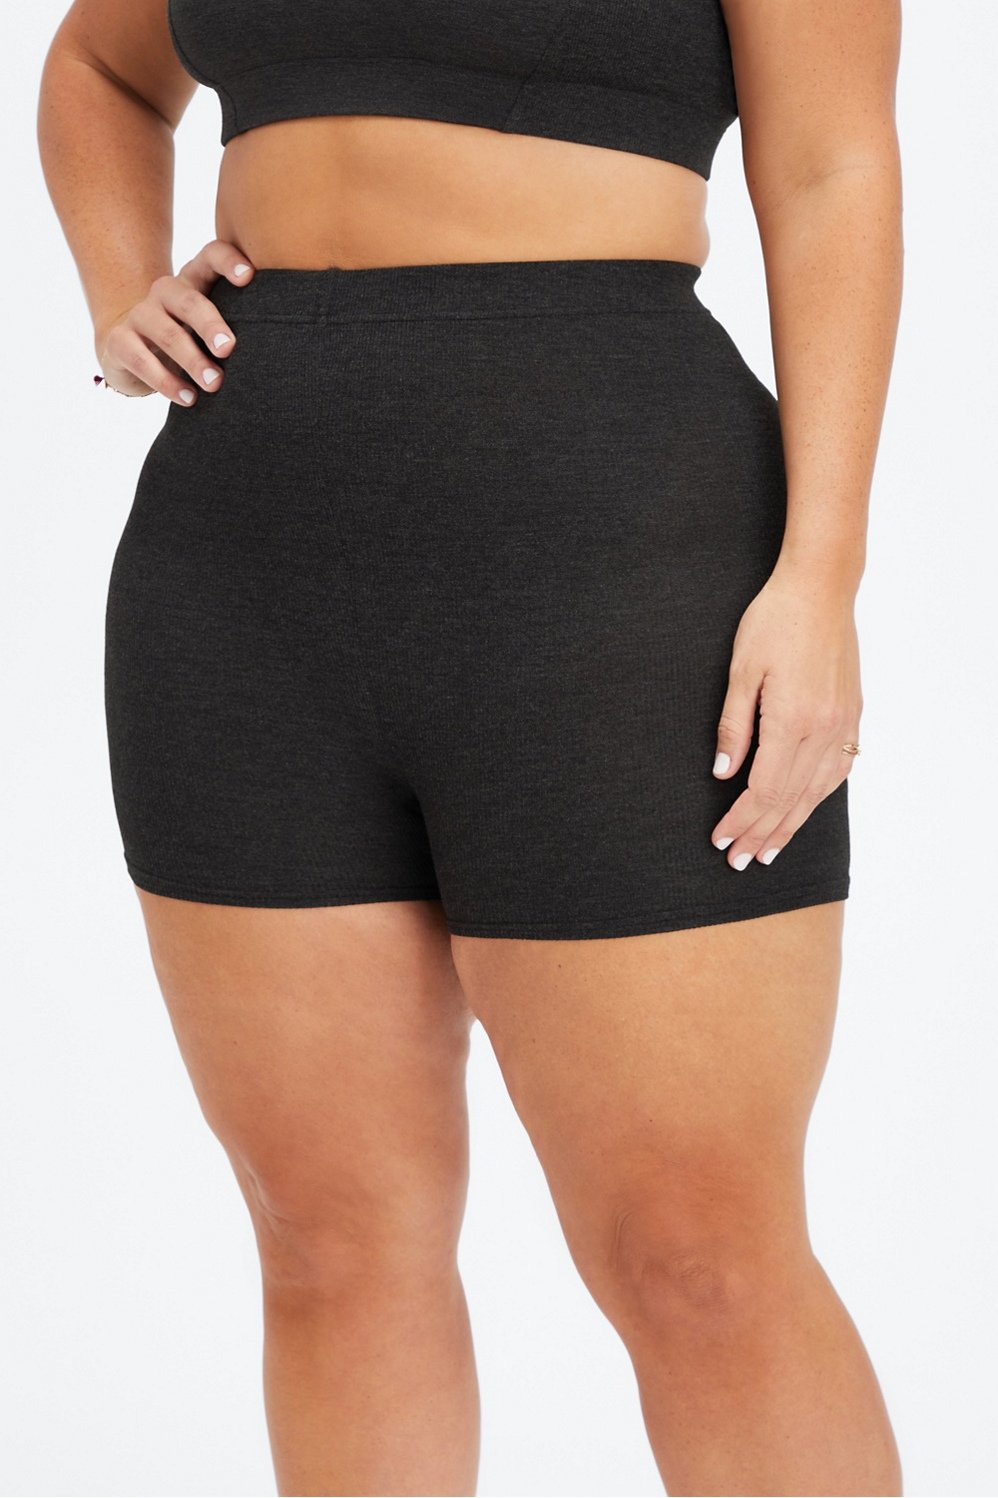 FABLETICS Restore Knit Slim Shorts XS Pewter Grey BNWT SOLD OUT